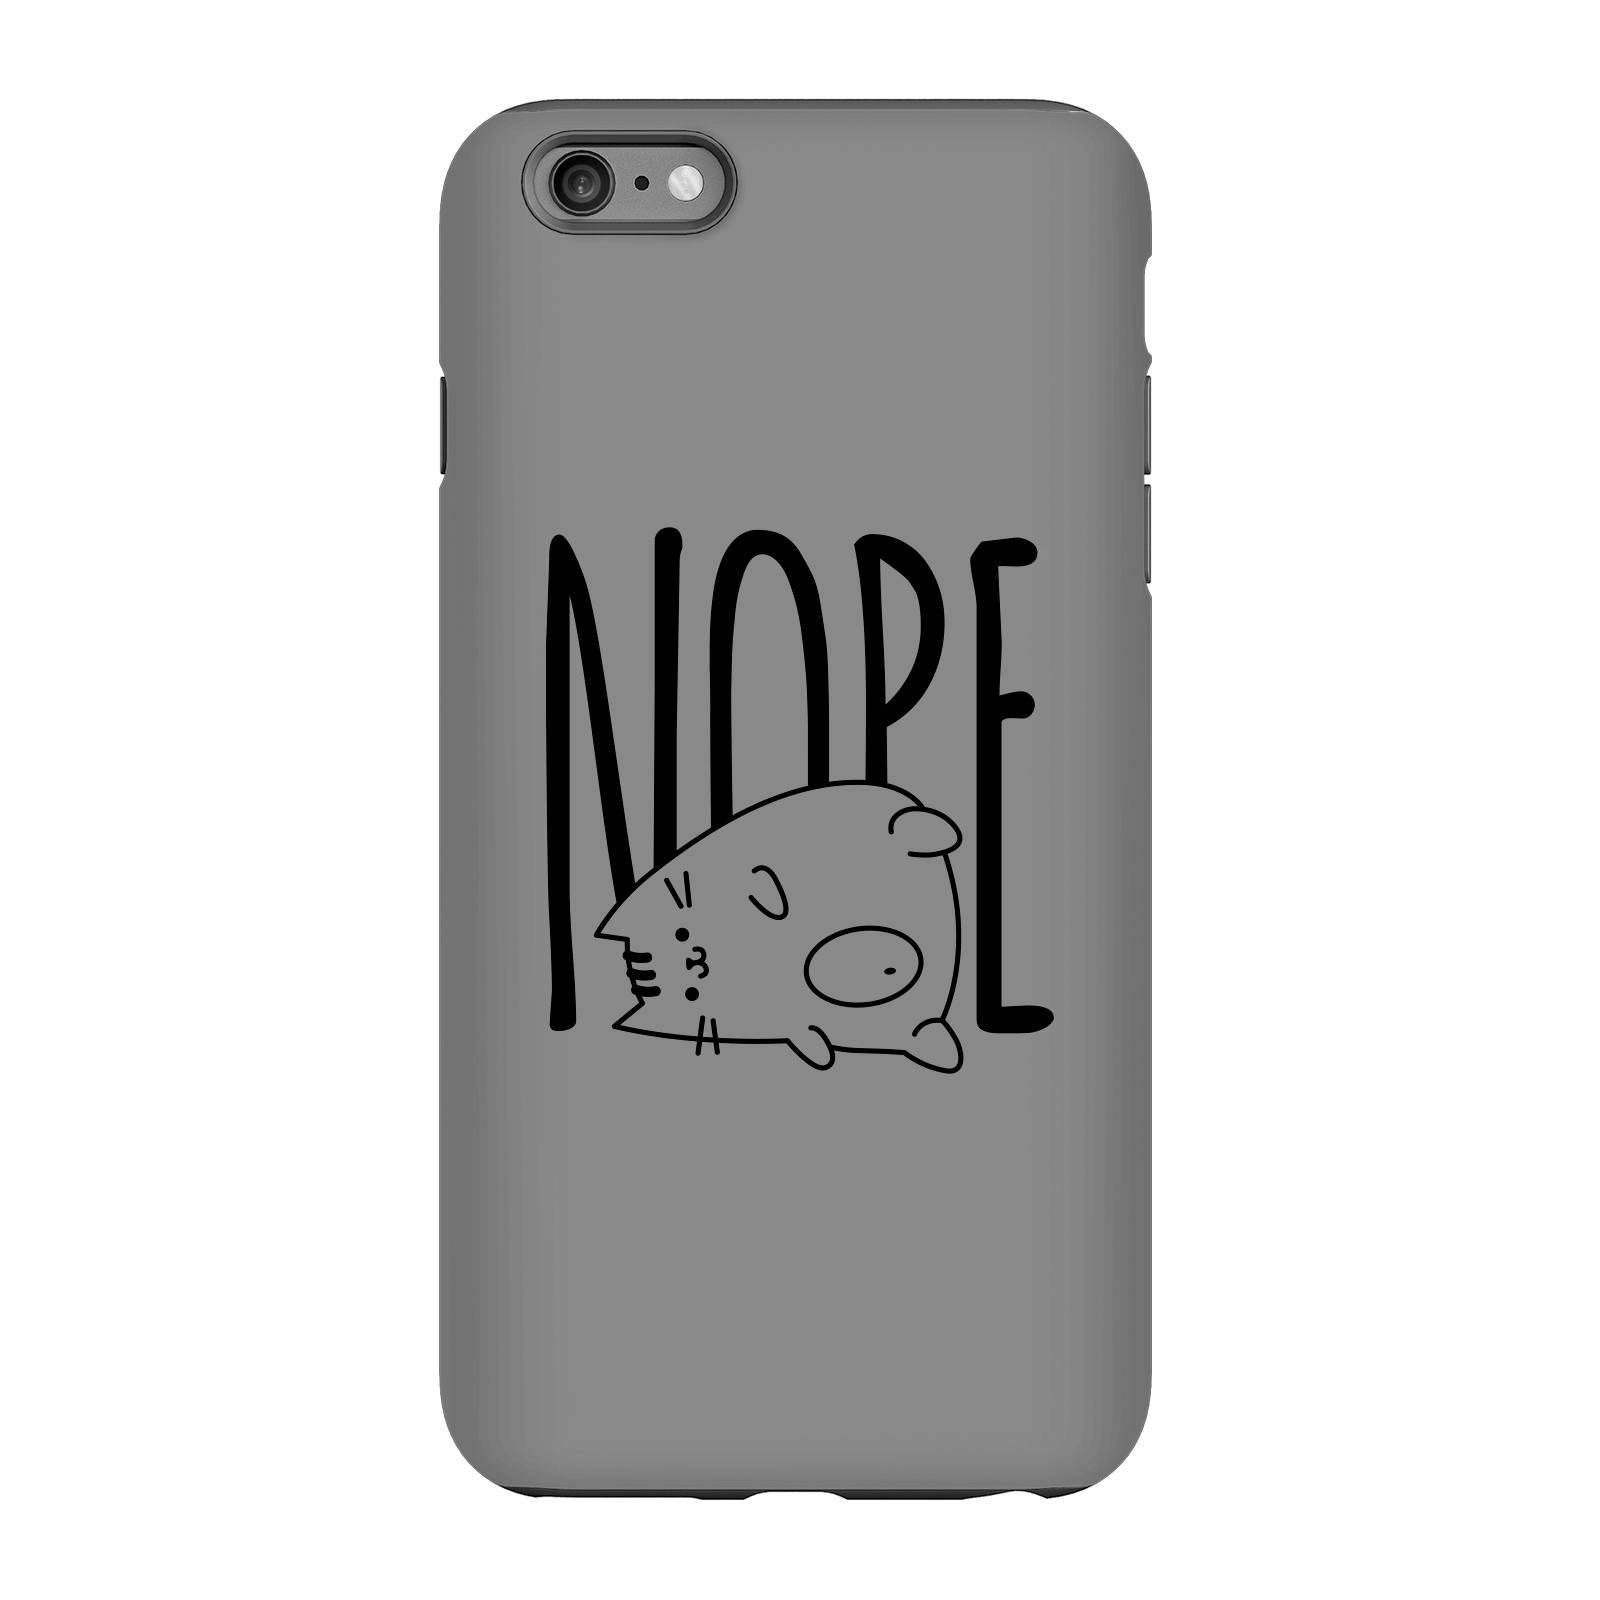 Nope Phone Case for iPhone and Android - iPhone 6 Plus - Tough Case - Matte